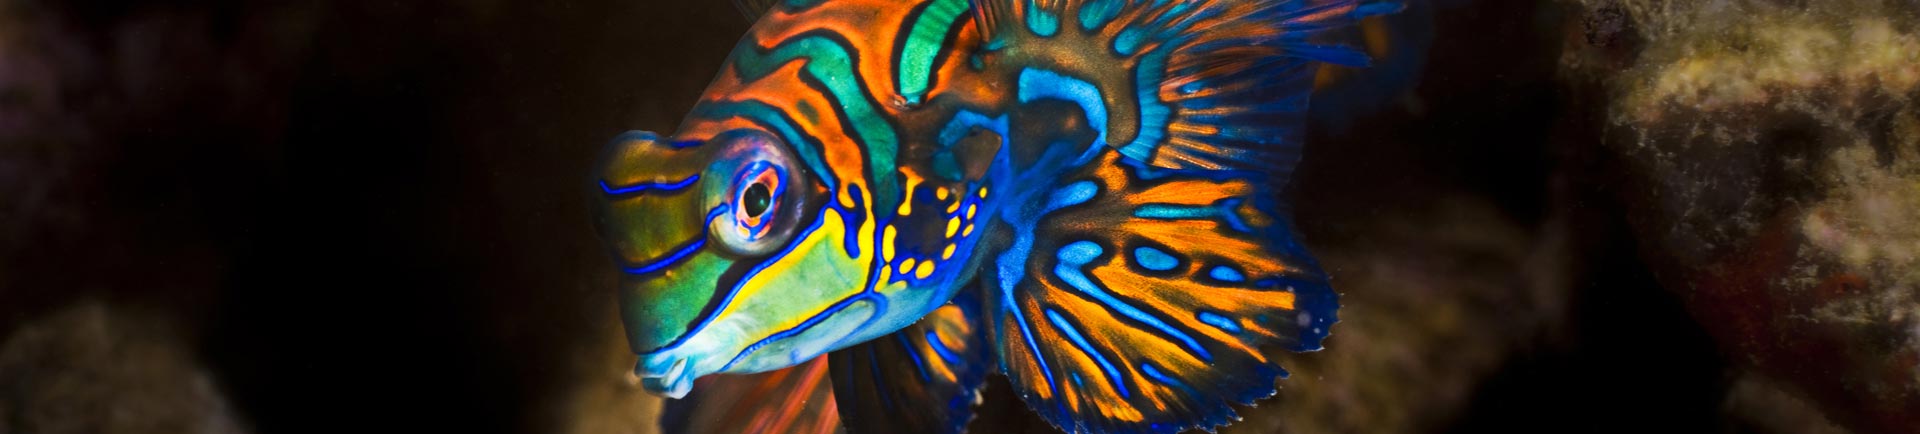 Brightly colored Mandarin fish photographed on a Phuket night dive